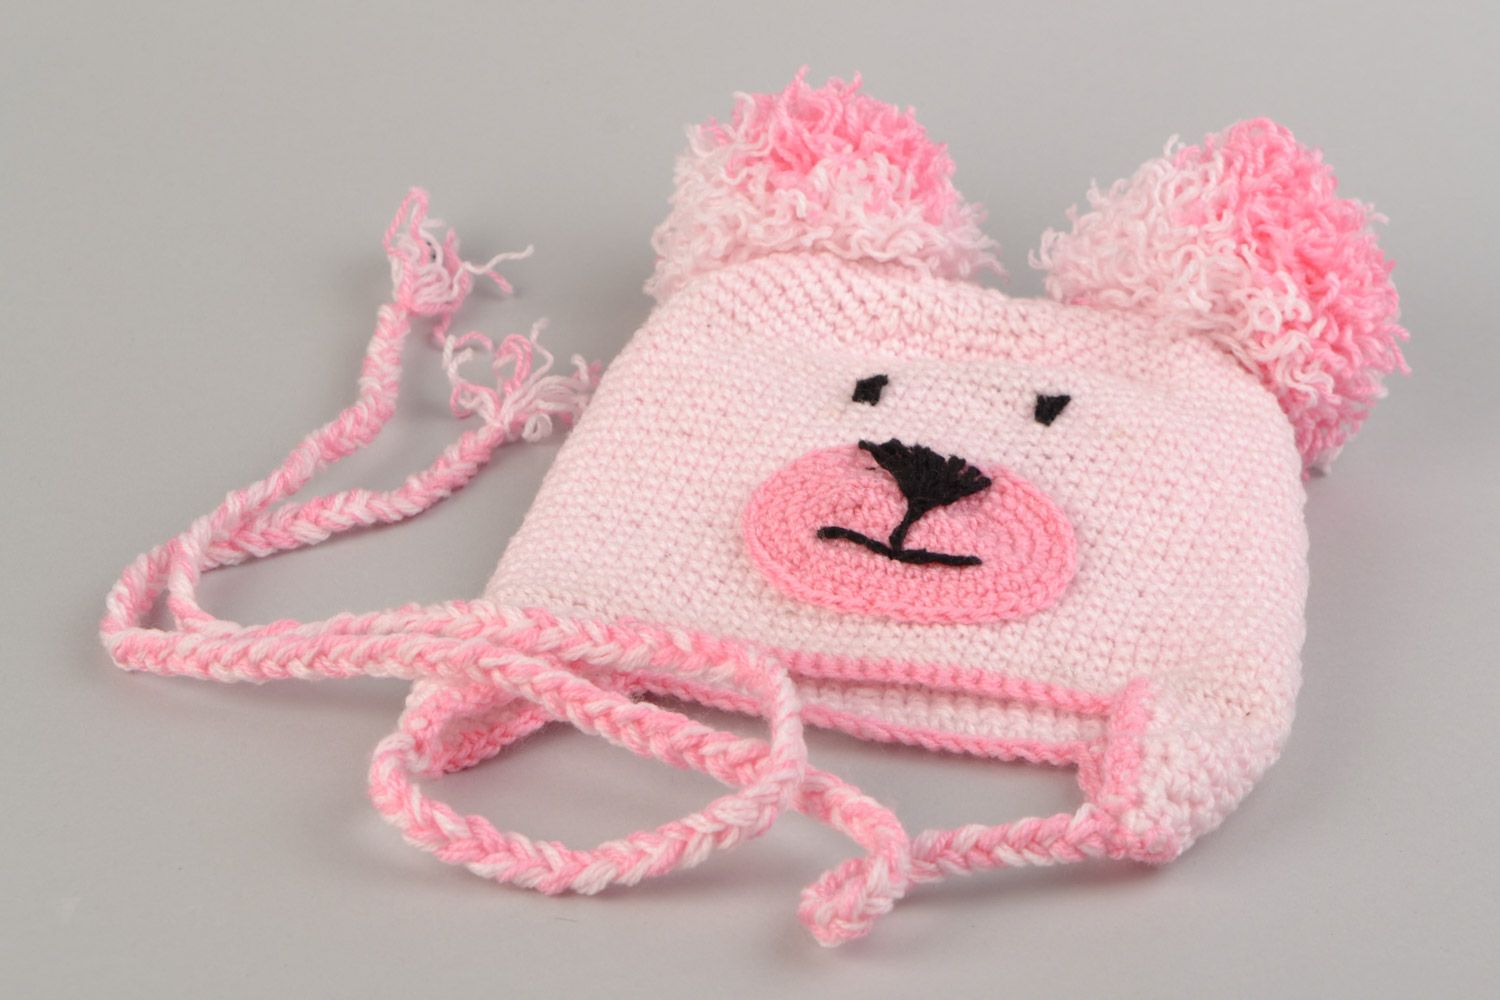 Handmade hat crocheted of hypoallergenic acrylics in the shape of pink bear photo 3